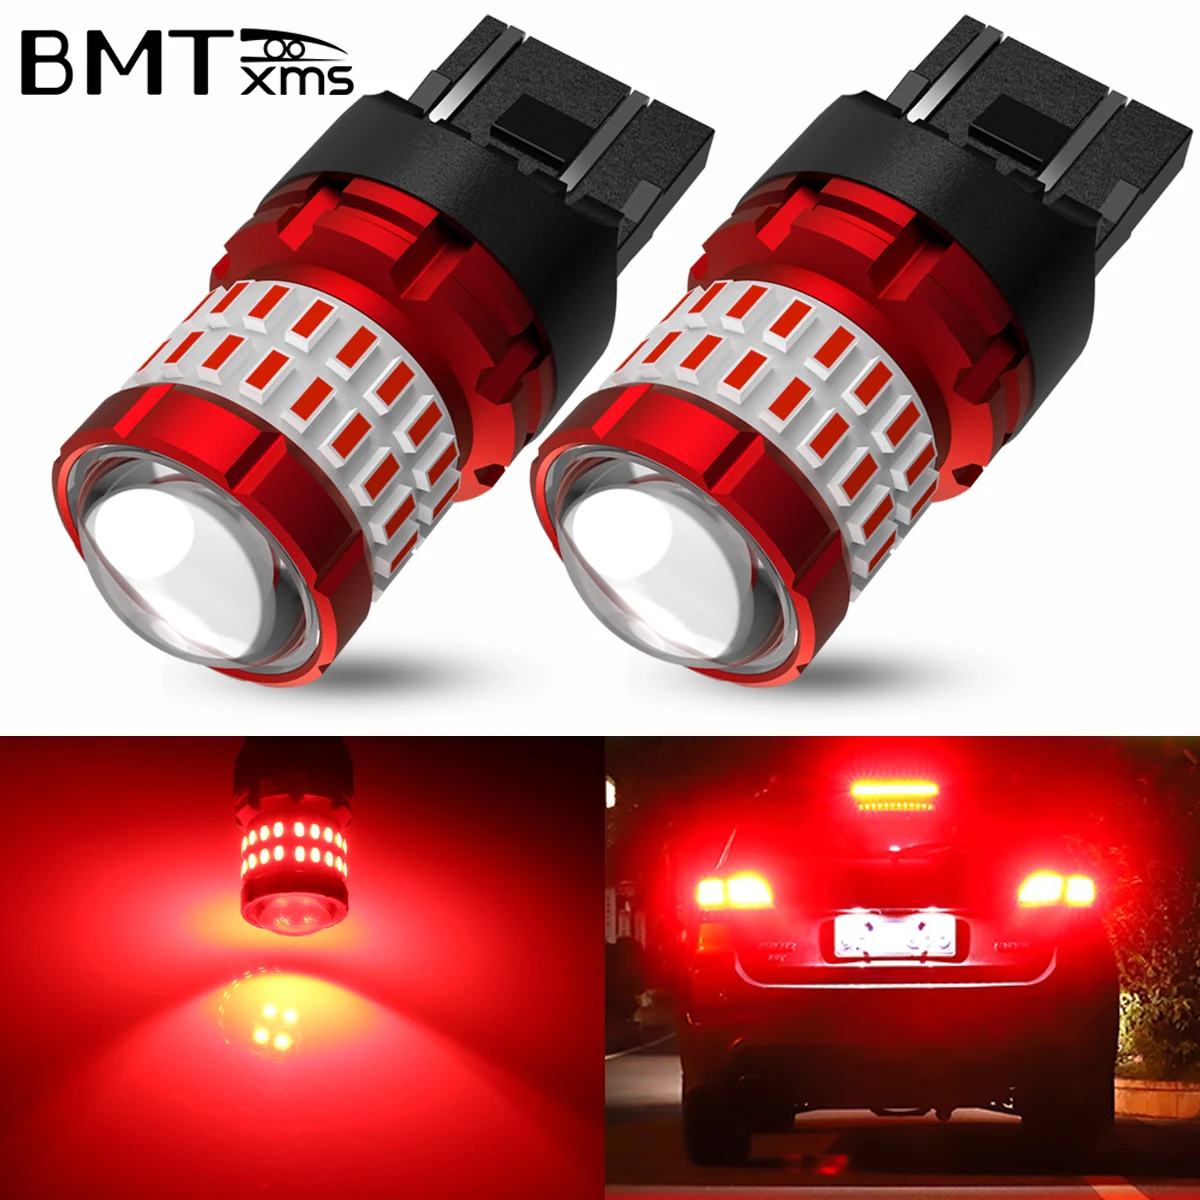 BMTxms 2pcs T20 W21W W21/5W LED 7440 7443 LED Canbus Bulbs Auto Red Brilliant Replacement Brake Tail Parking Light Car Lamps 12V